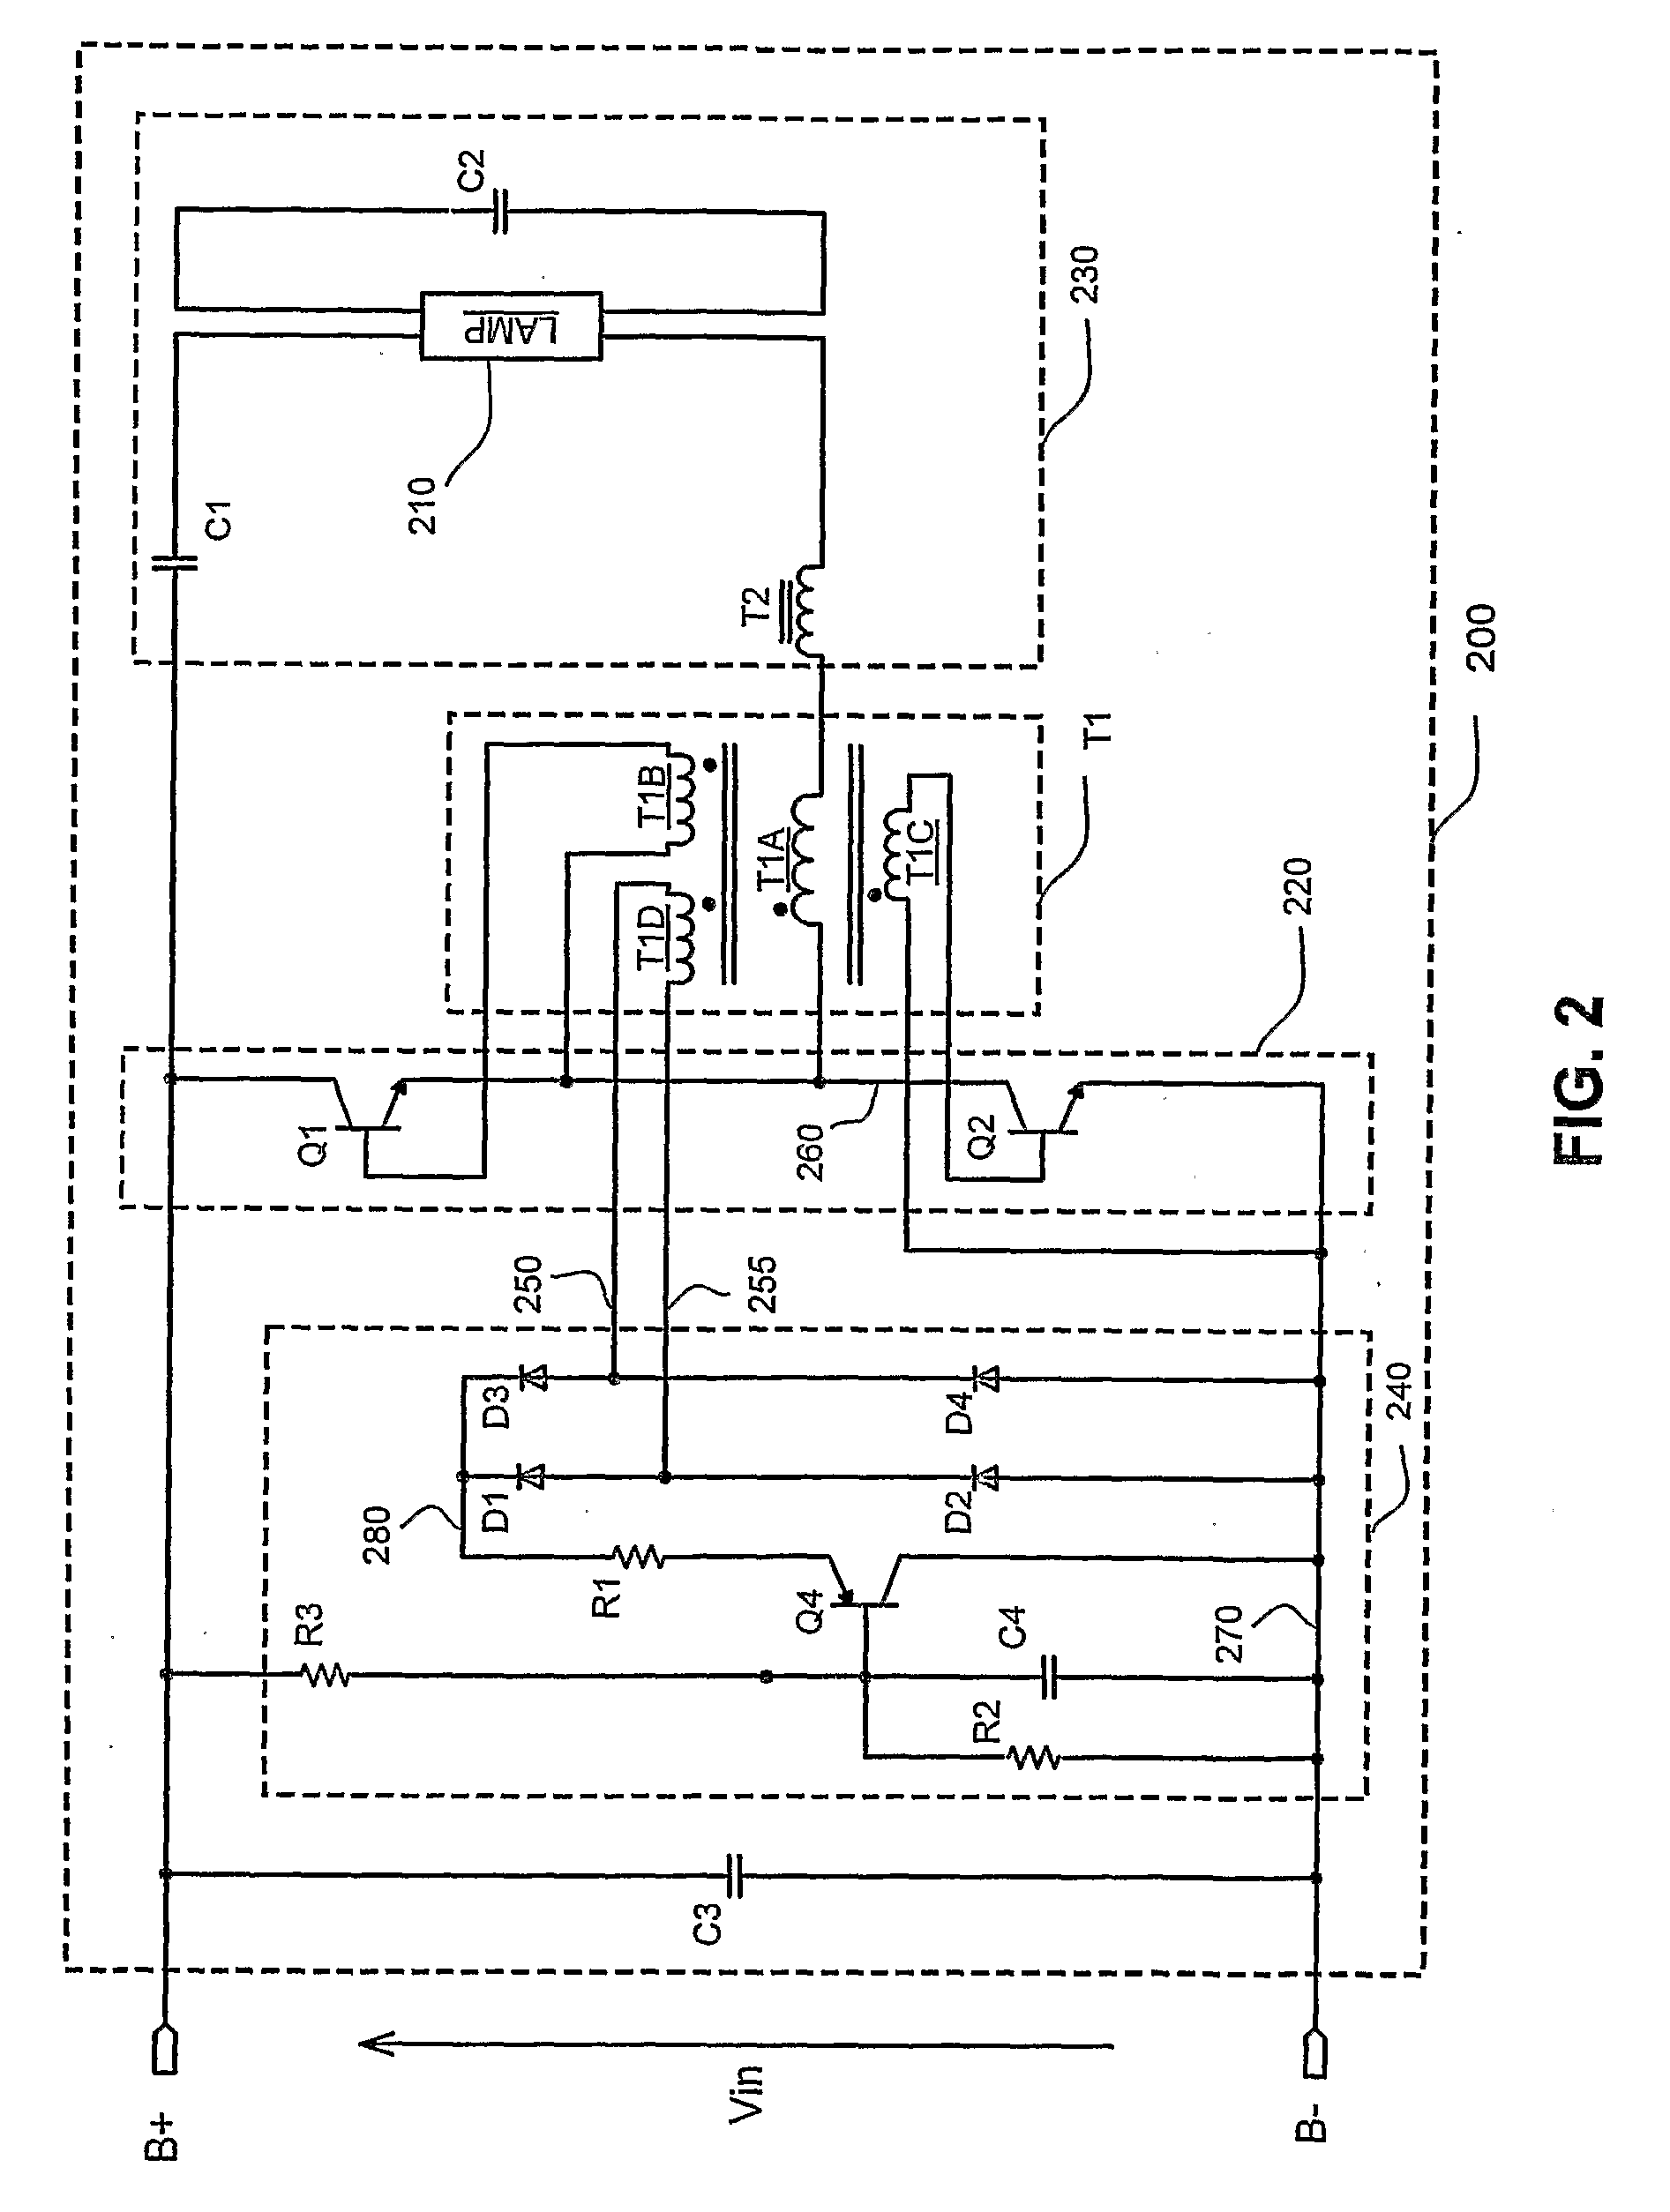 Electronic Ballast With Preheating and Dimming Control